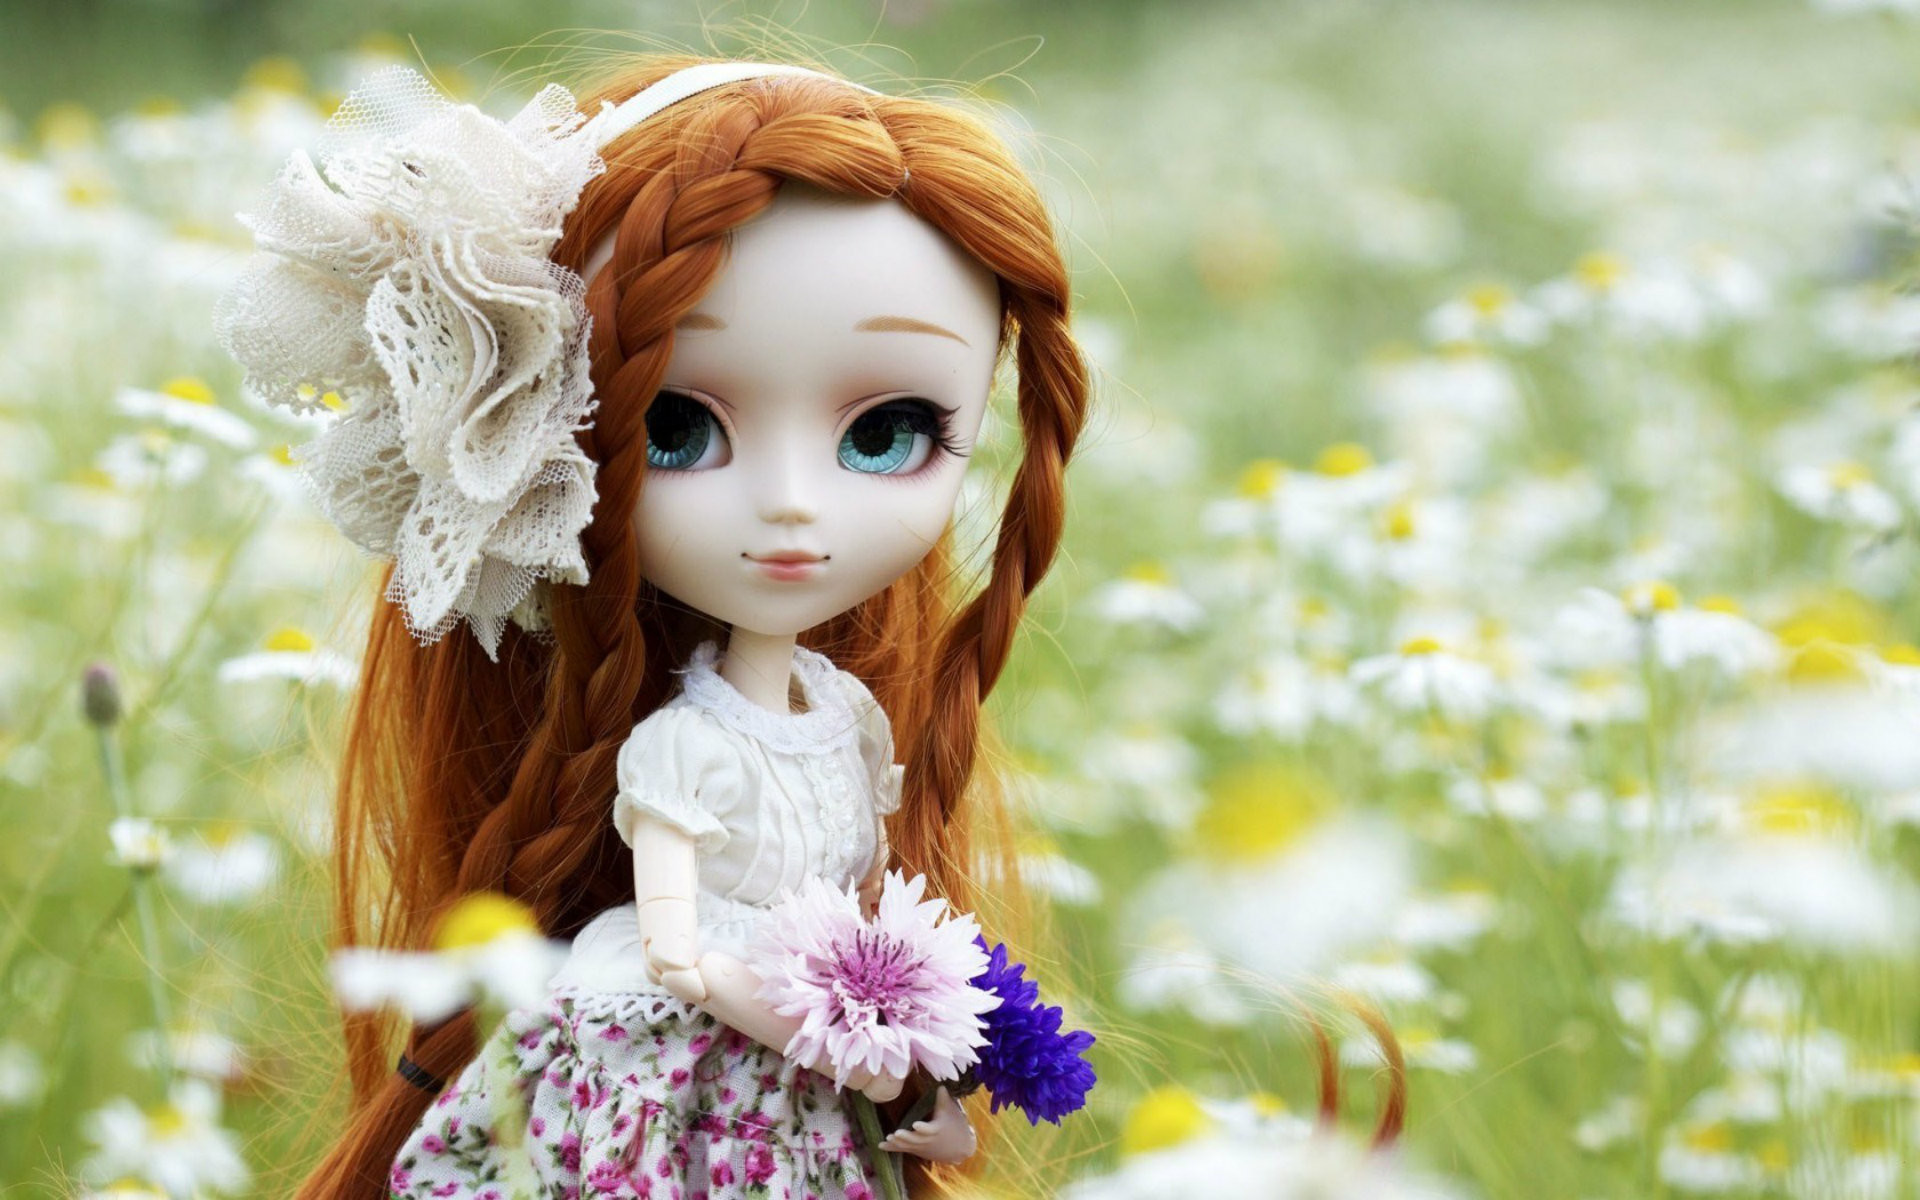 doll wallpaper,doll,people in nature,spring,toy,flower